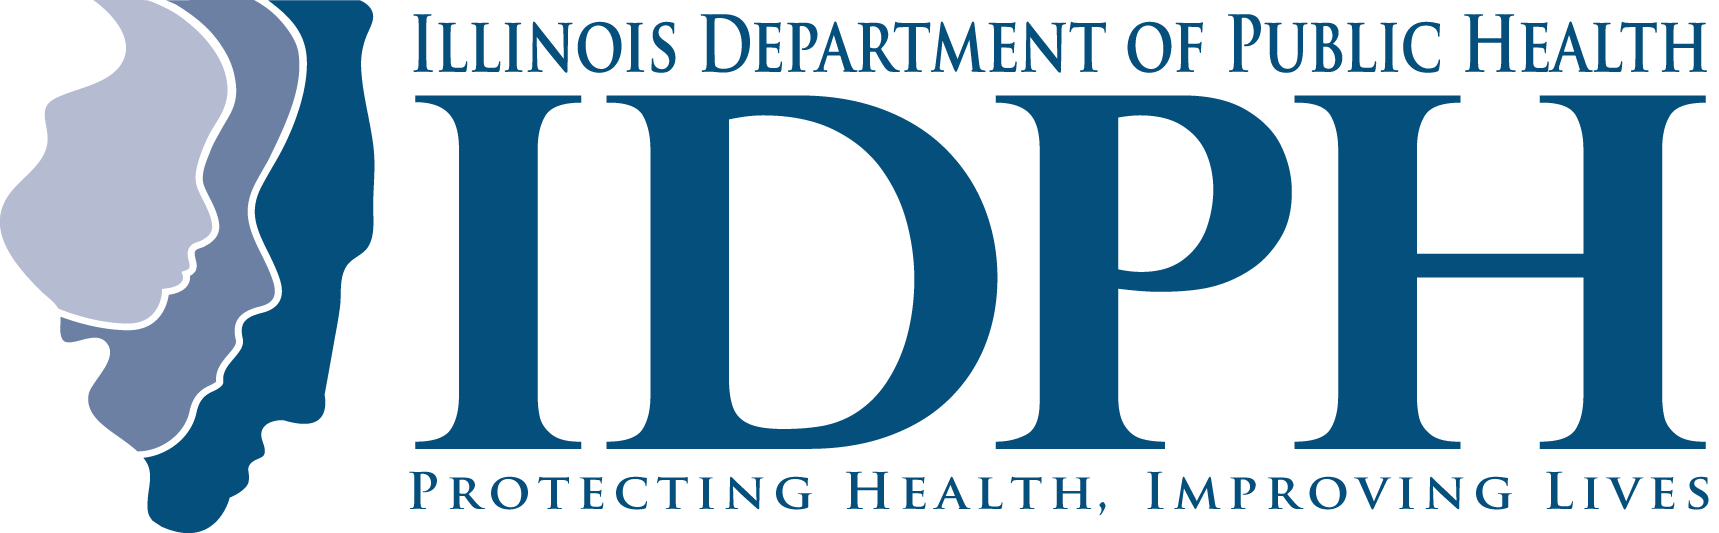 Illinois Department of Public Health: Protecting Health, Improving Lives